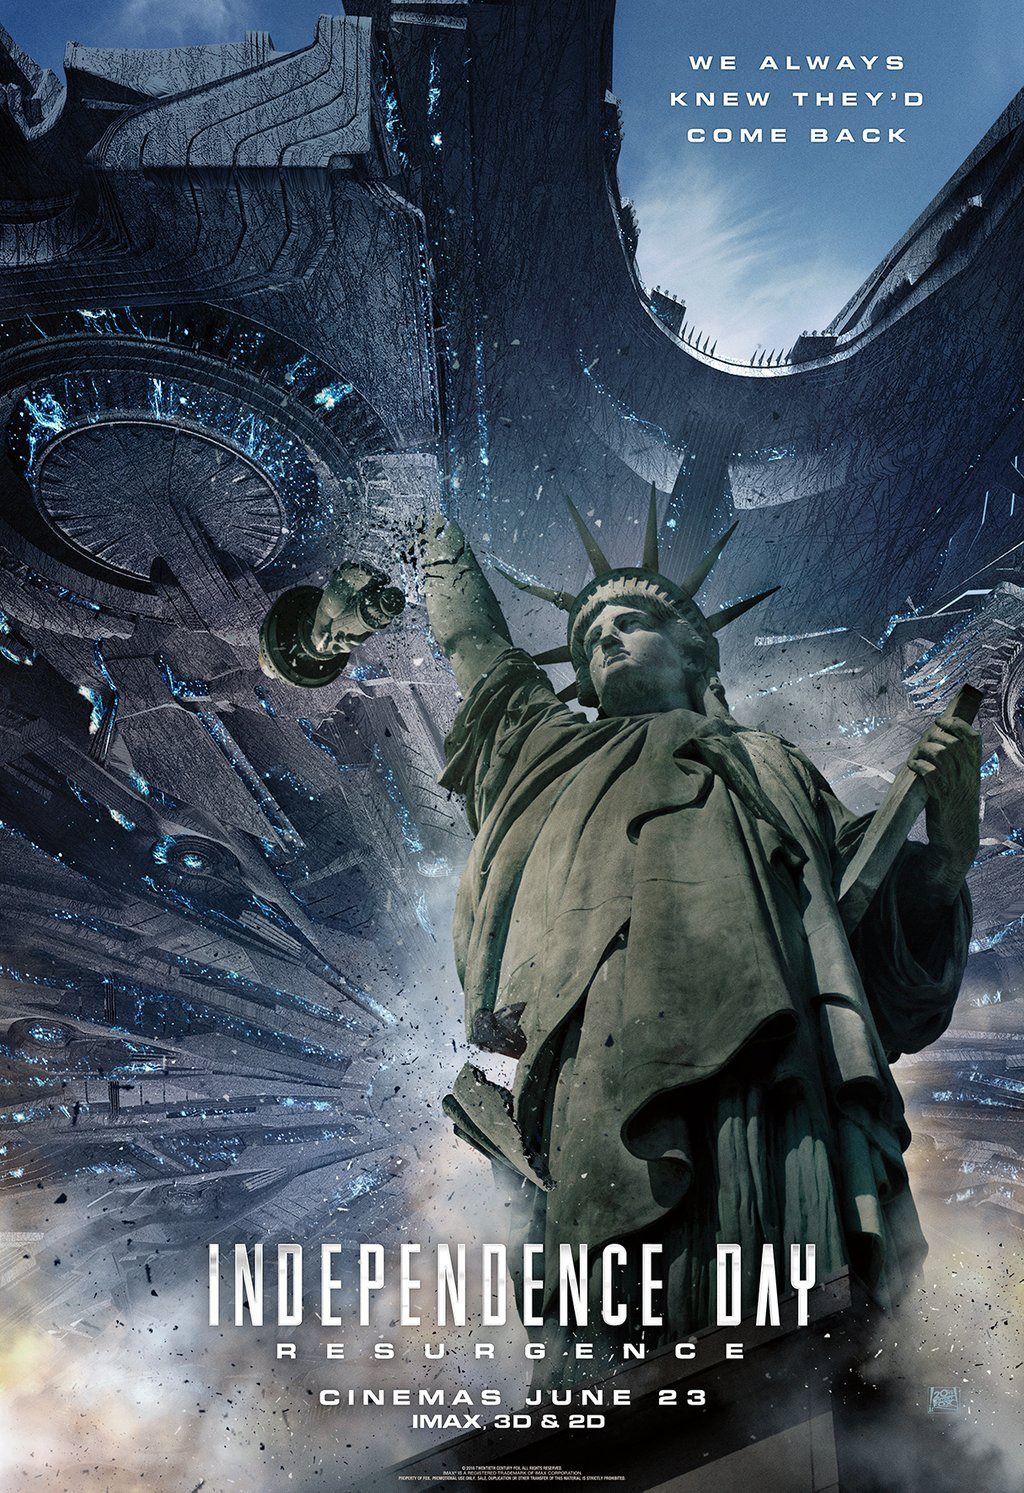 Independence Day: Resurgence Statue of Liberty Poster